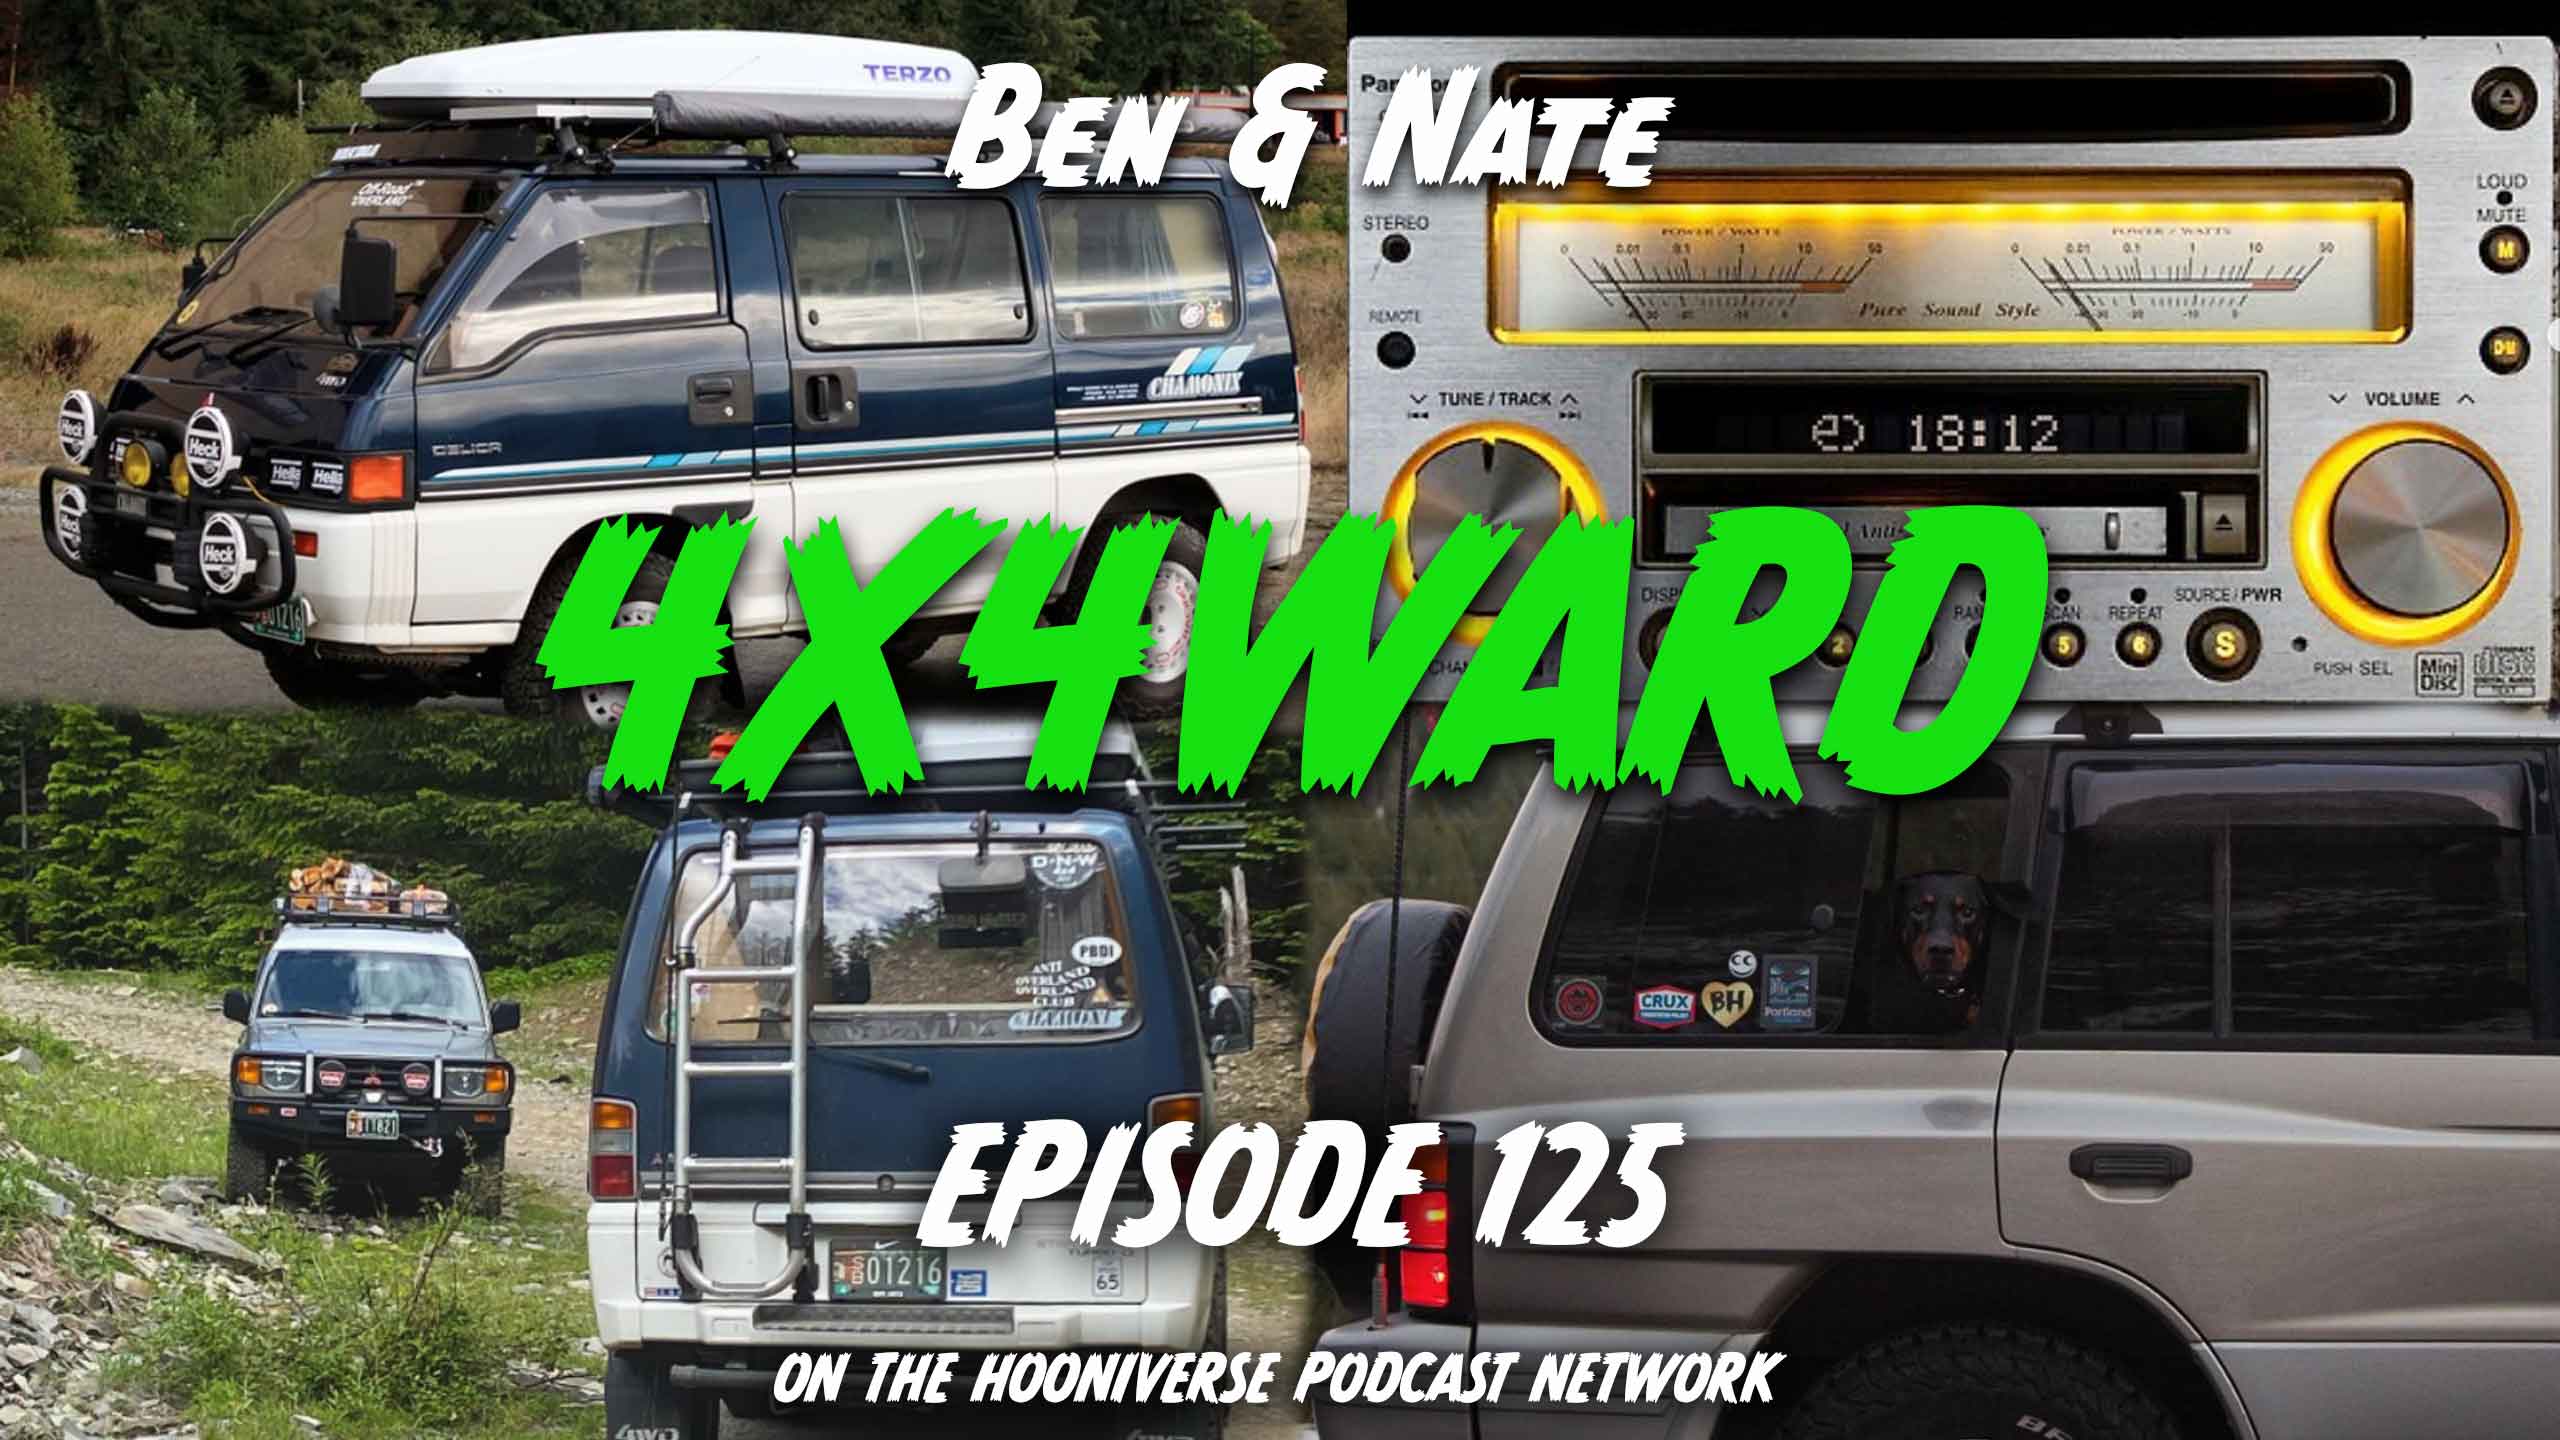 4x4ward-ben-nate-off-the-road-again-podcast-episode-125